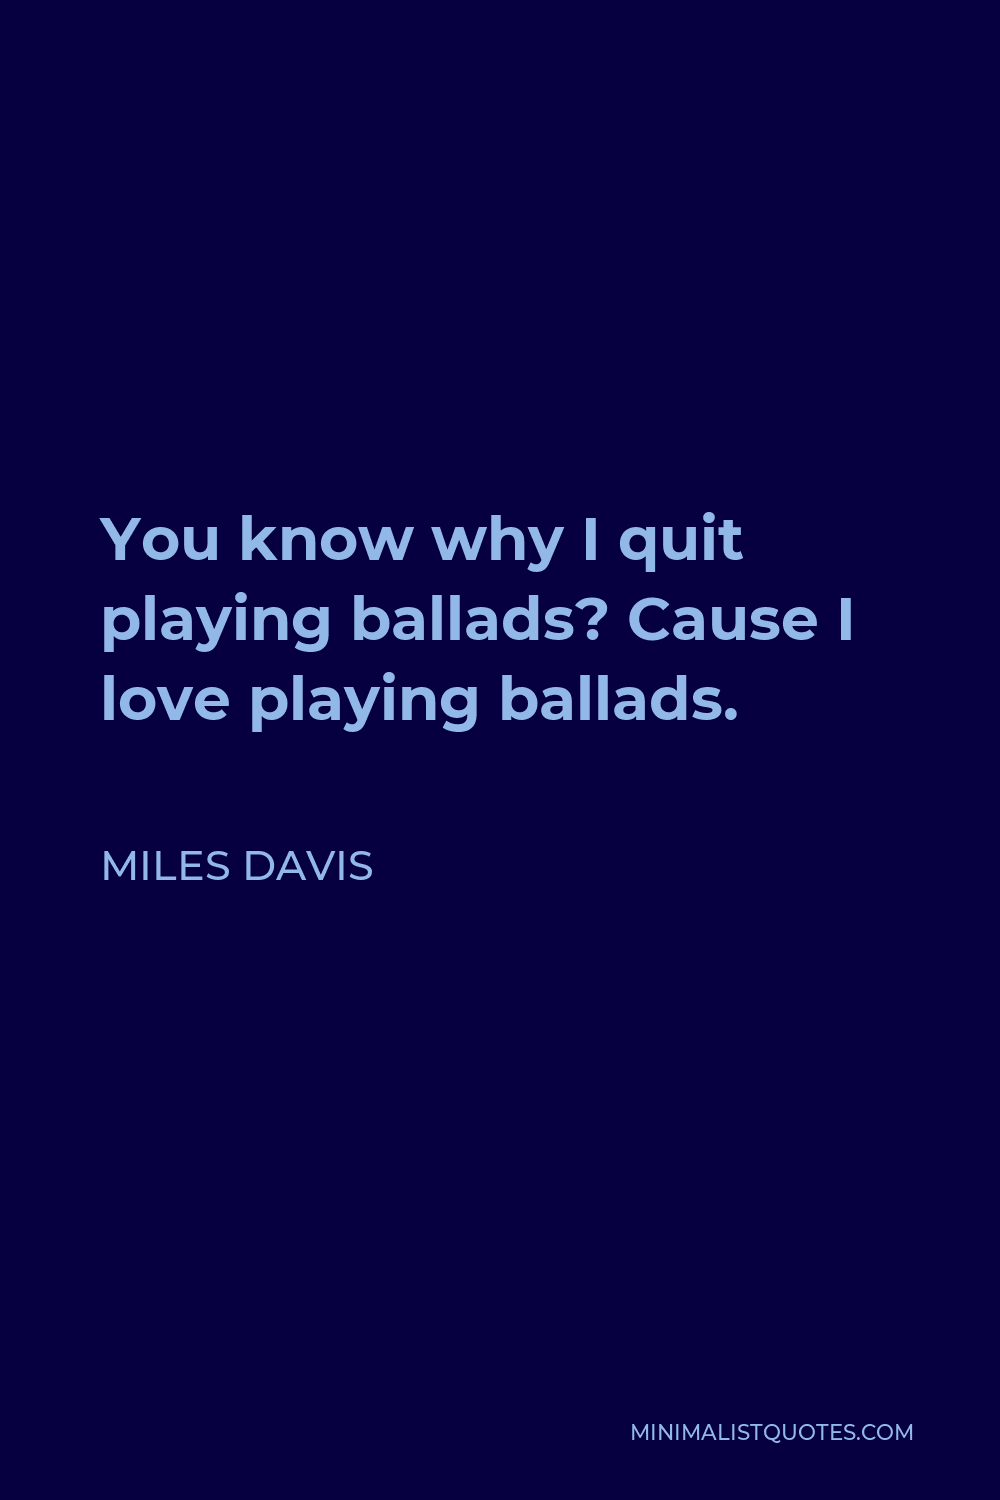 Miles Davis Quote - You know why I quit playing ballads? Cause I love playing ballads.